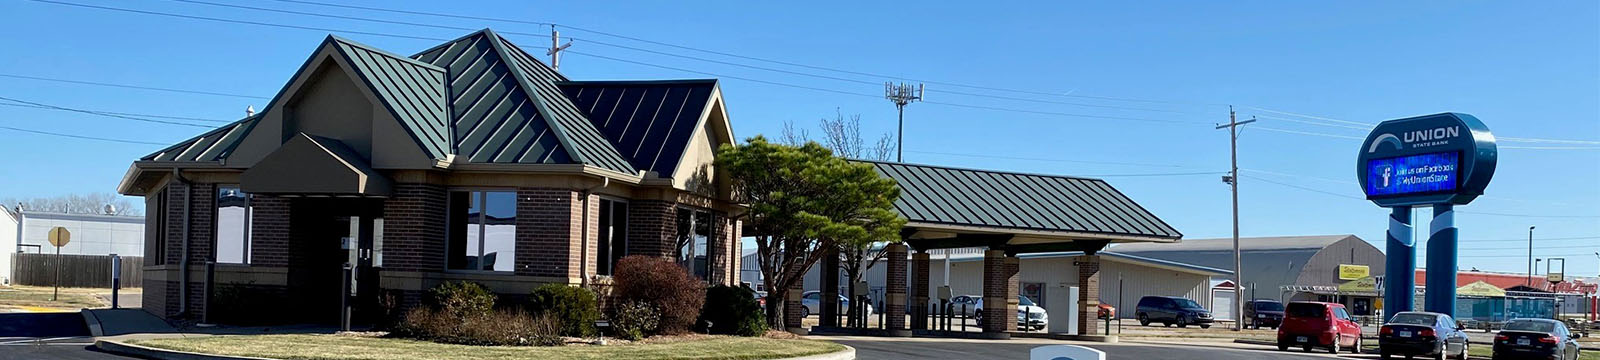 Photo of the Newton South Union State Bank location.